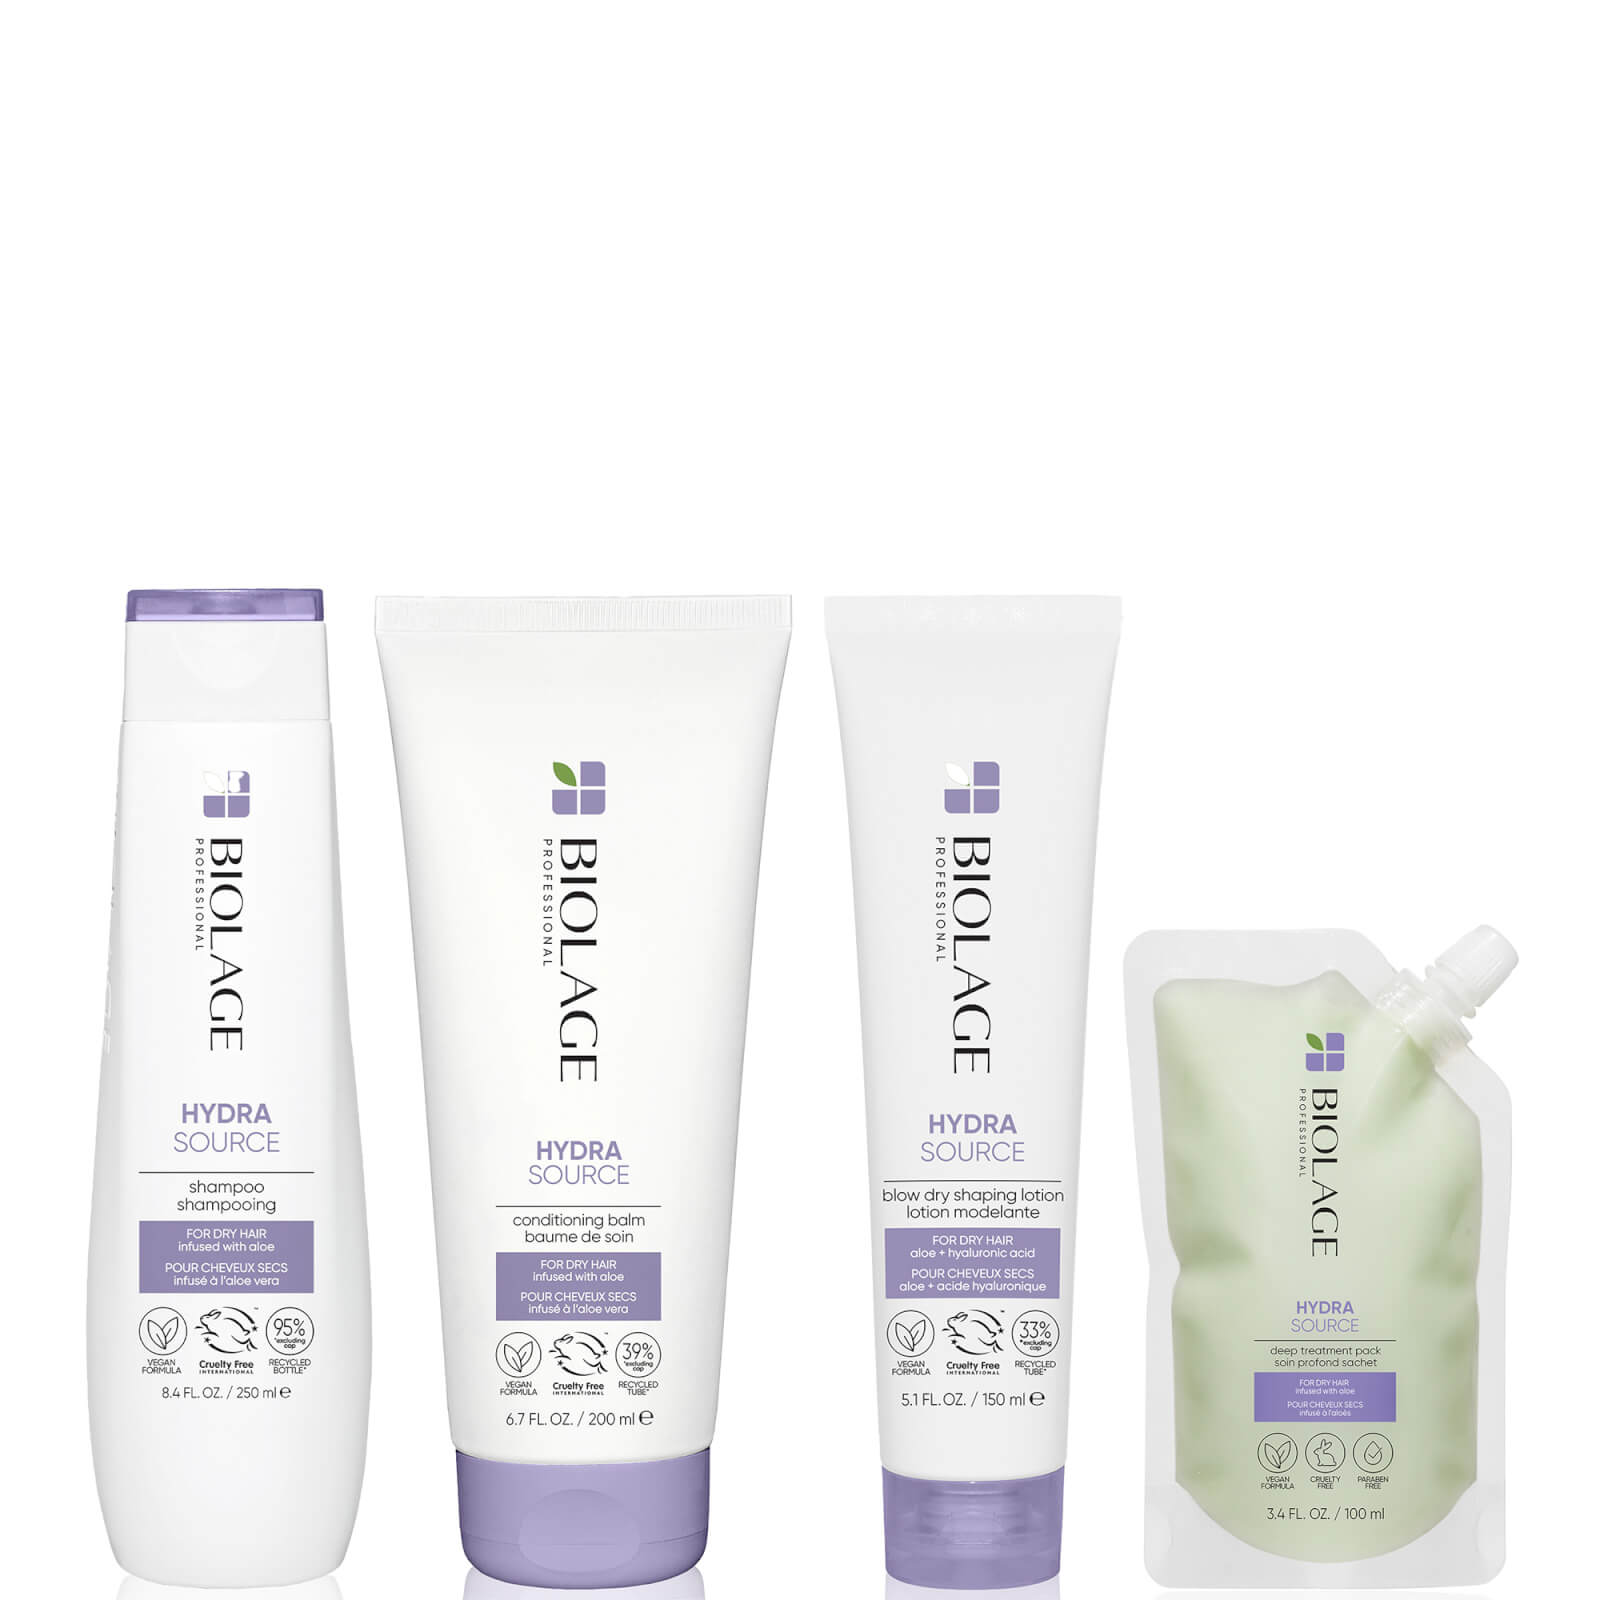 Biolage Hydrasource Hydrating Shampoo, Conditioner, Blow Dry Lotion and Deep Treatment Hair Mask Rou